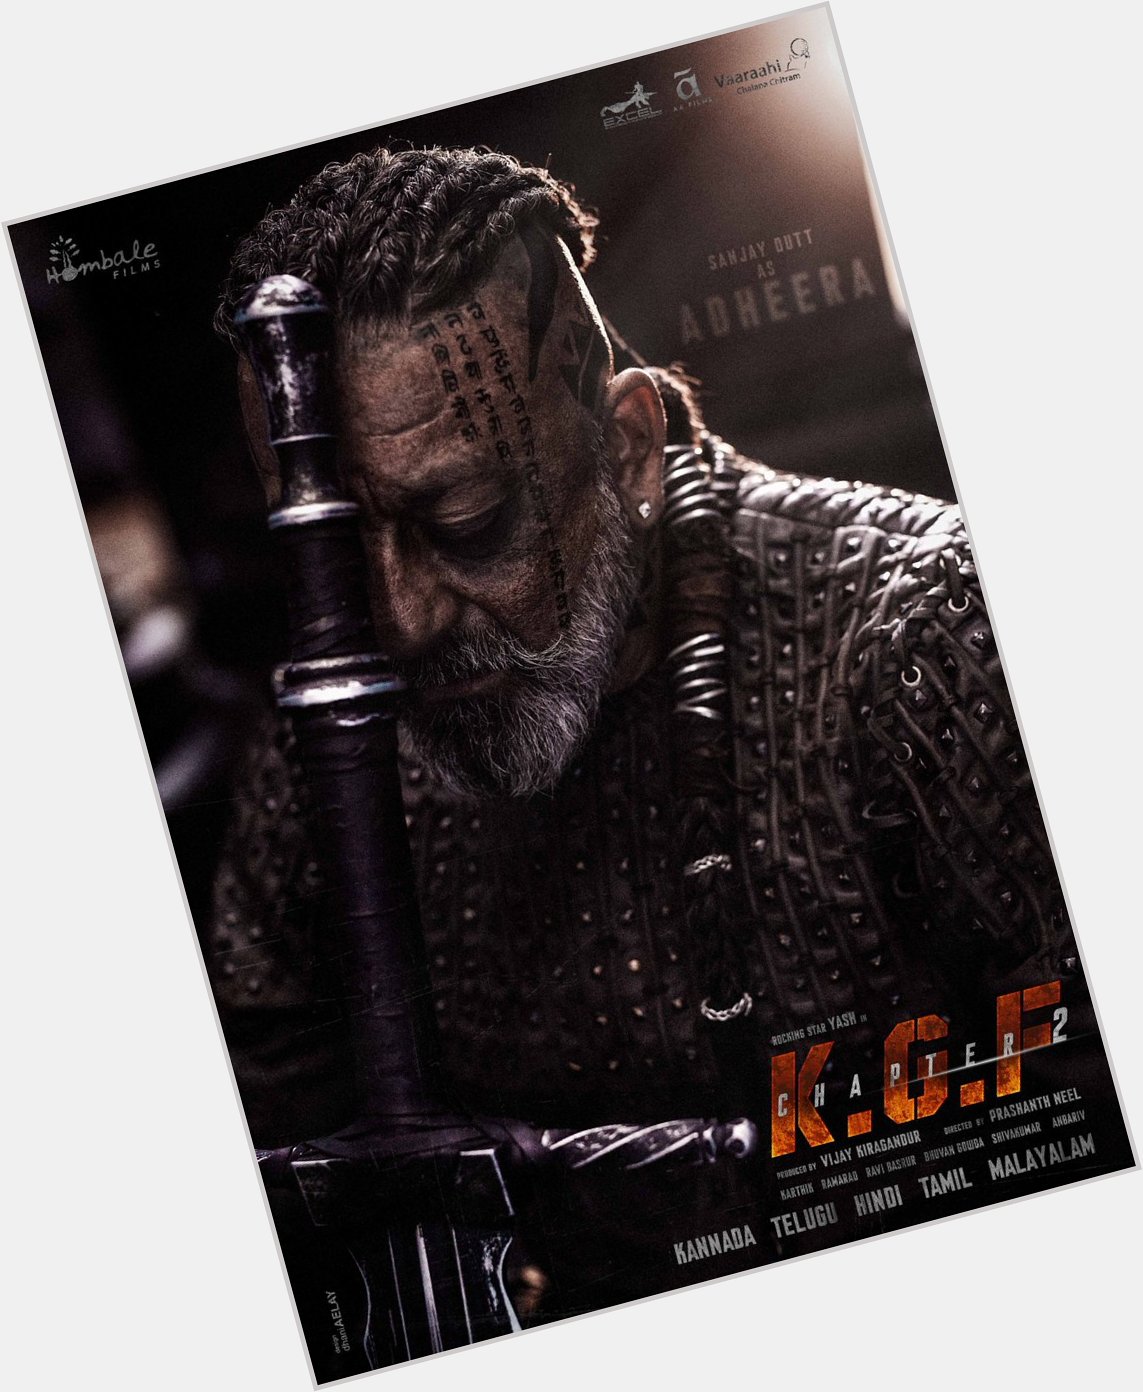  ADHEERA - Inspired by the brutal ways of the vikings KGF CHAPTER 2 Happy Birthday sanjay dutt sir 